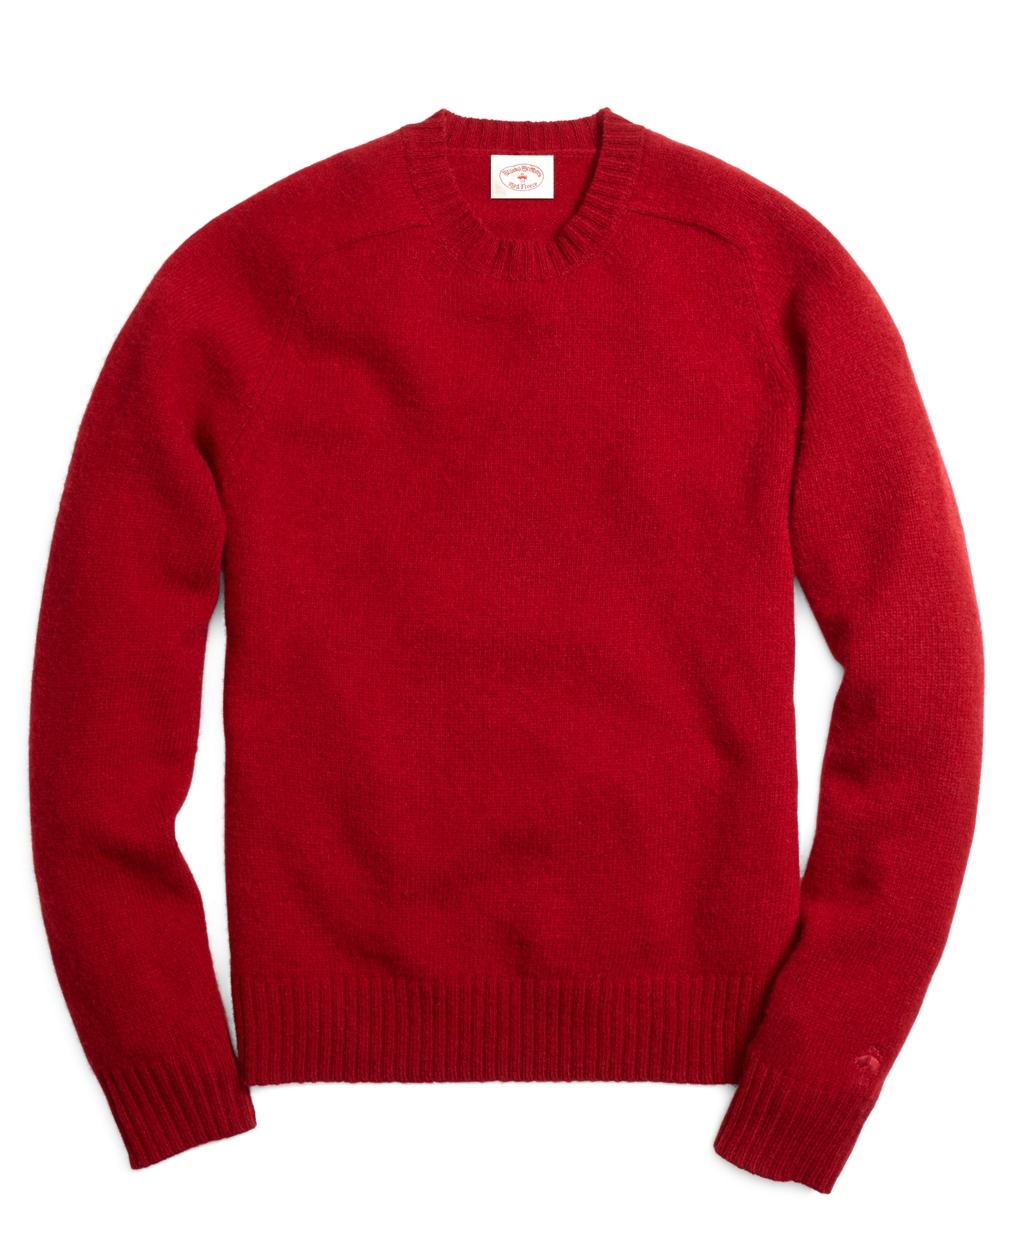 Lyst - Brooks brothers Shetland Crewneck Sweater in Red for Men